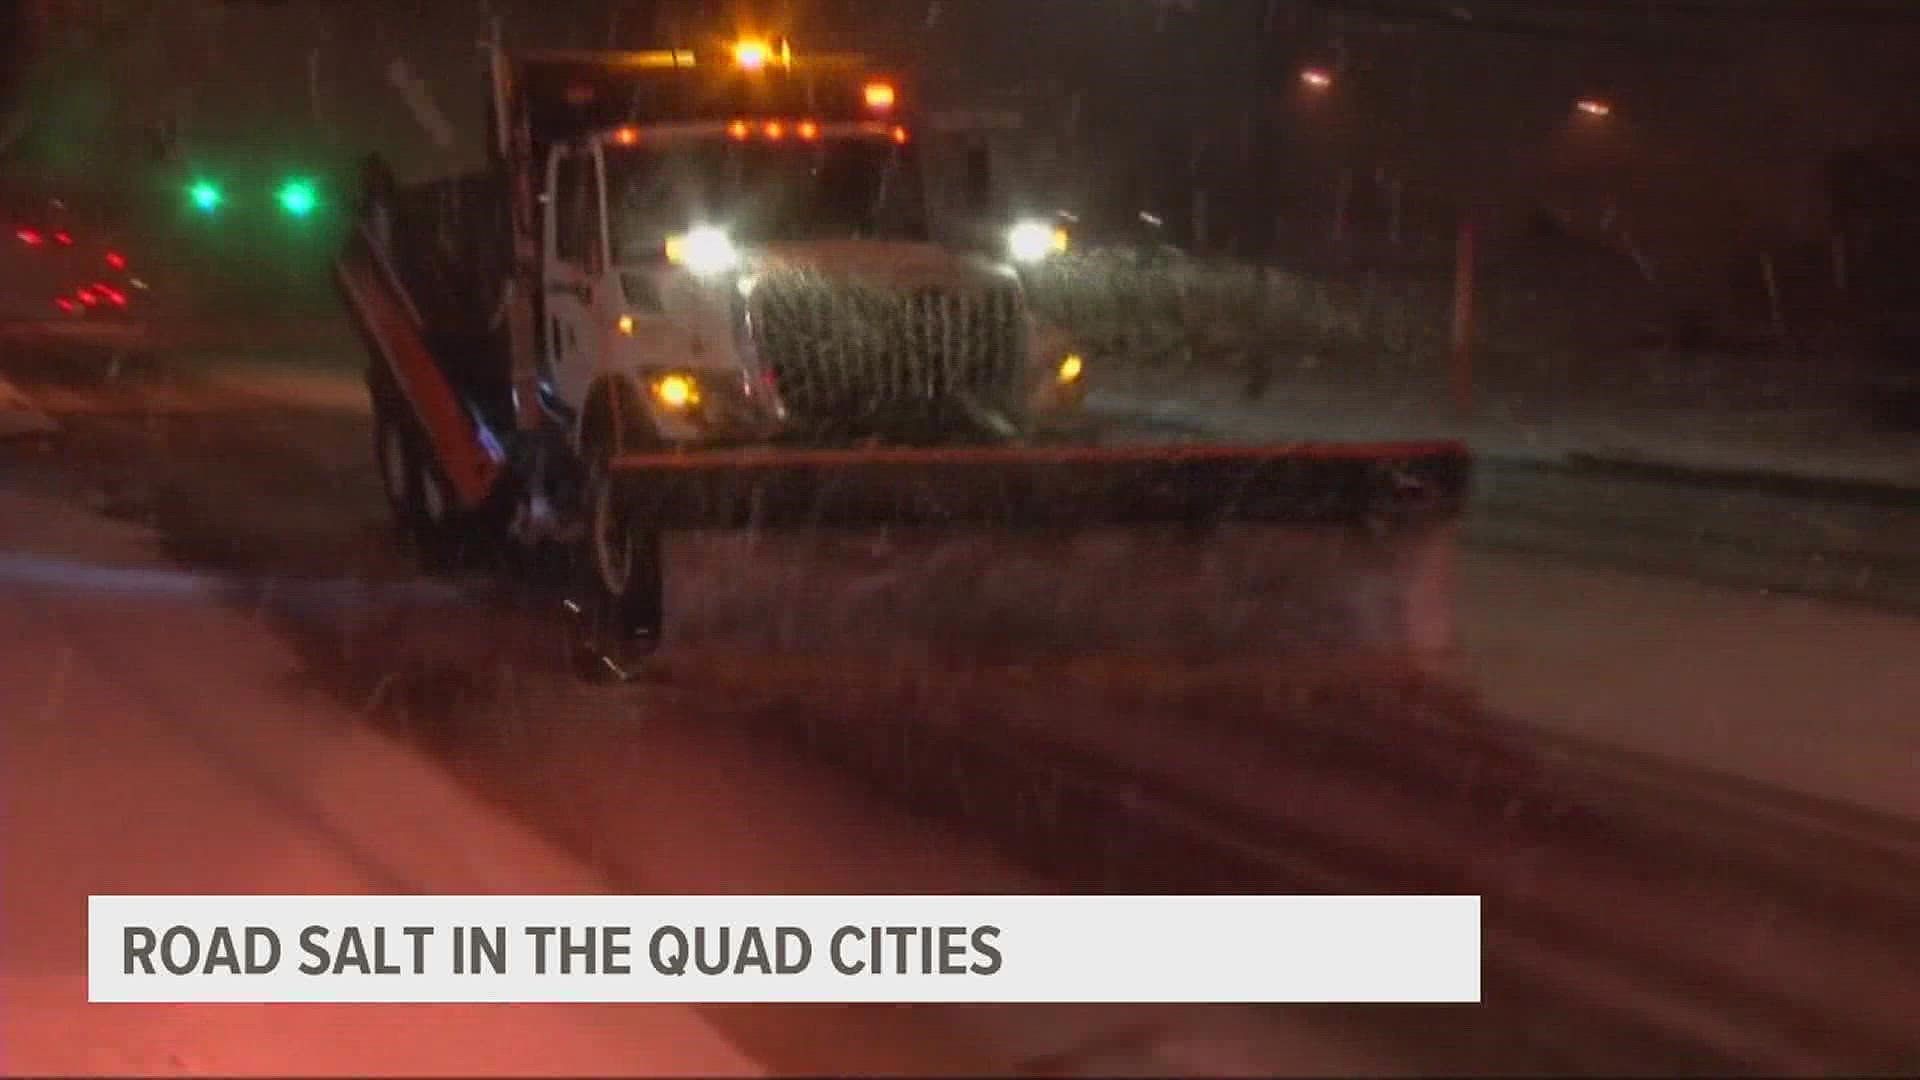 With the first 2022 winter storm in the Quad Cities coming, it takes proper timing and a special salt mix to keep the streets clear.